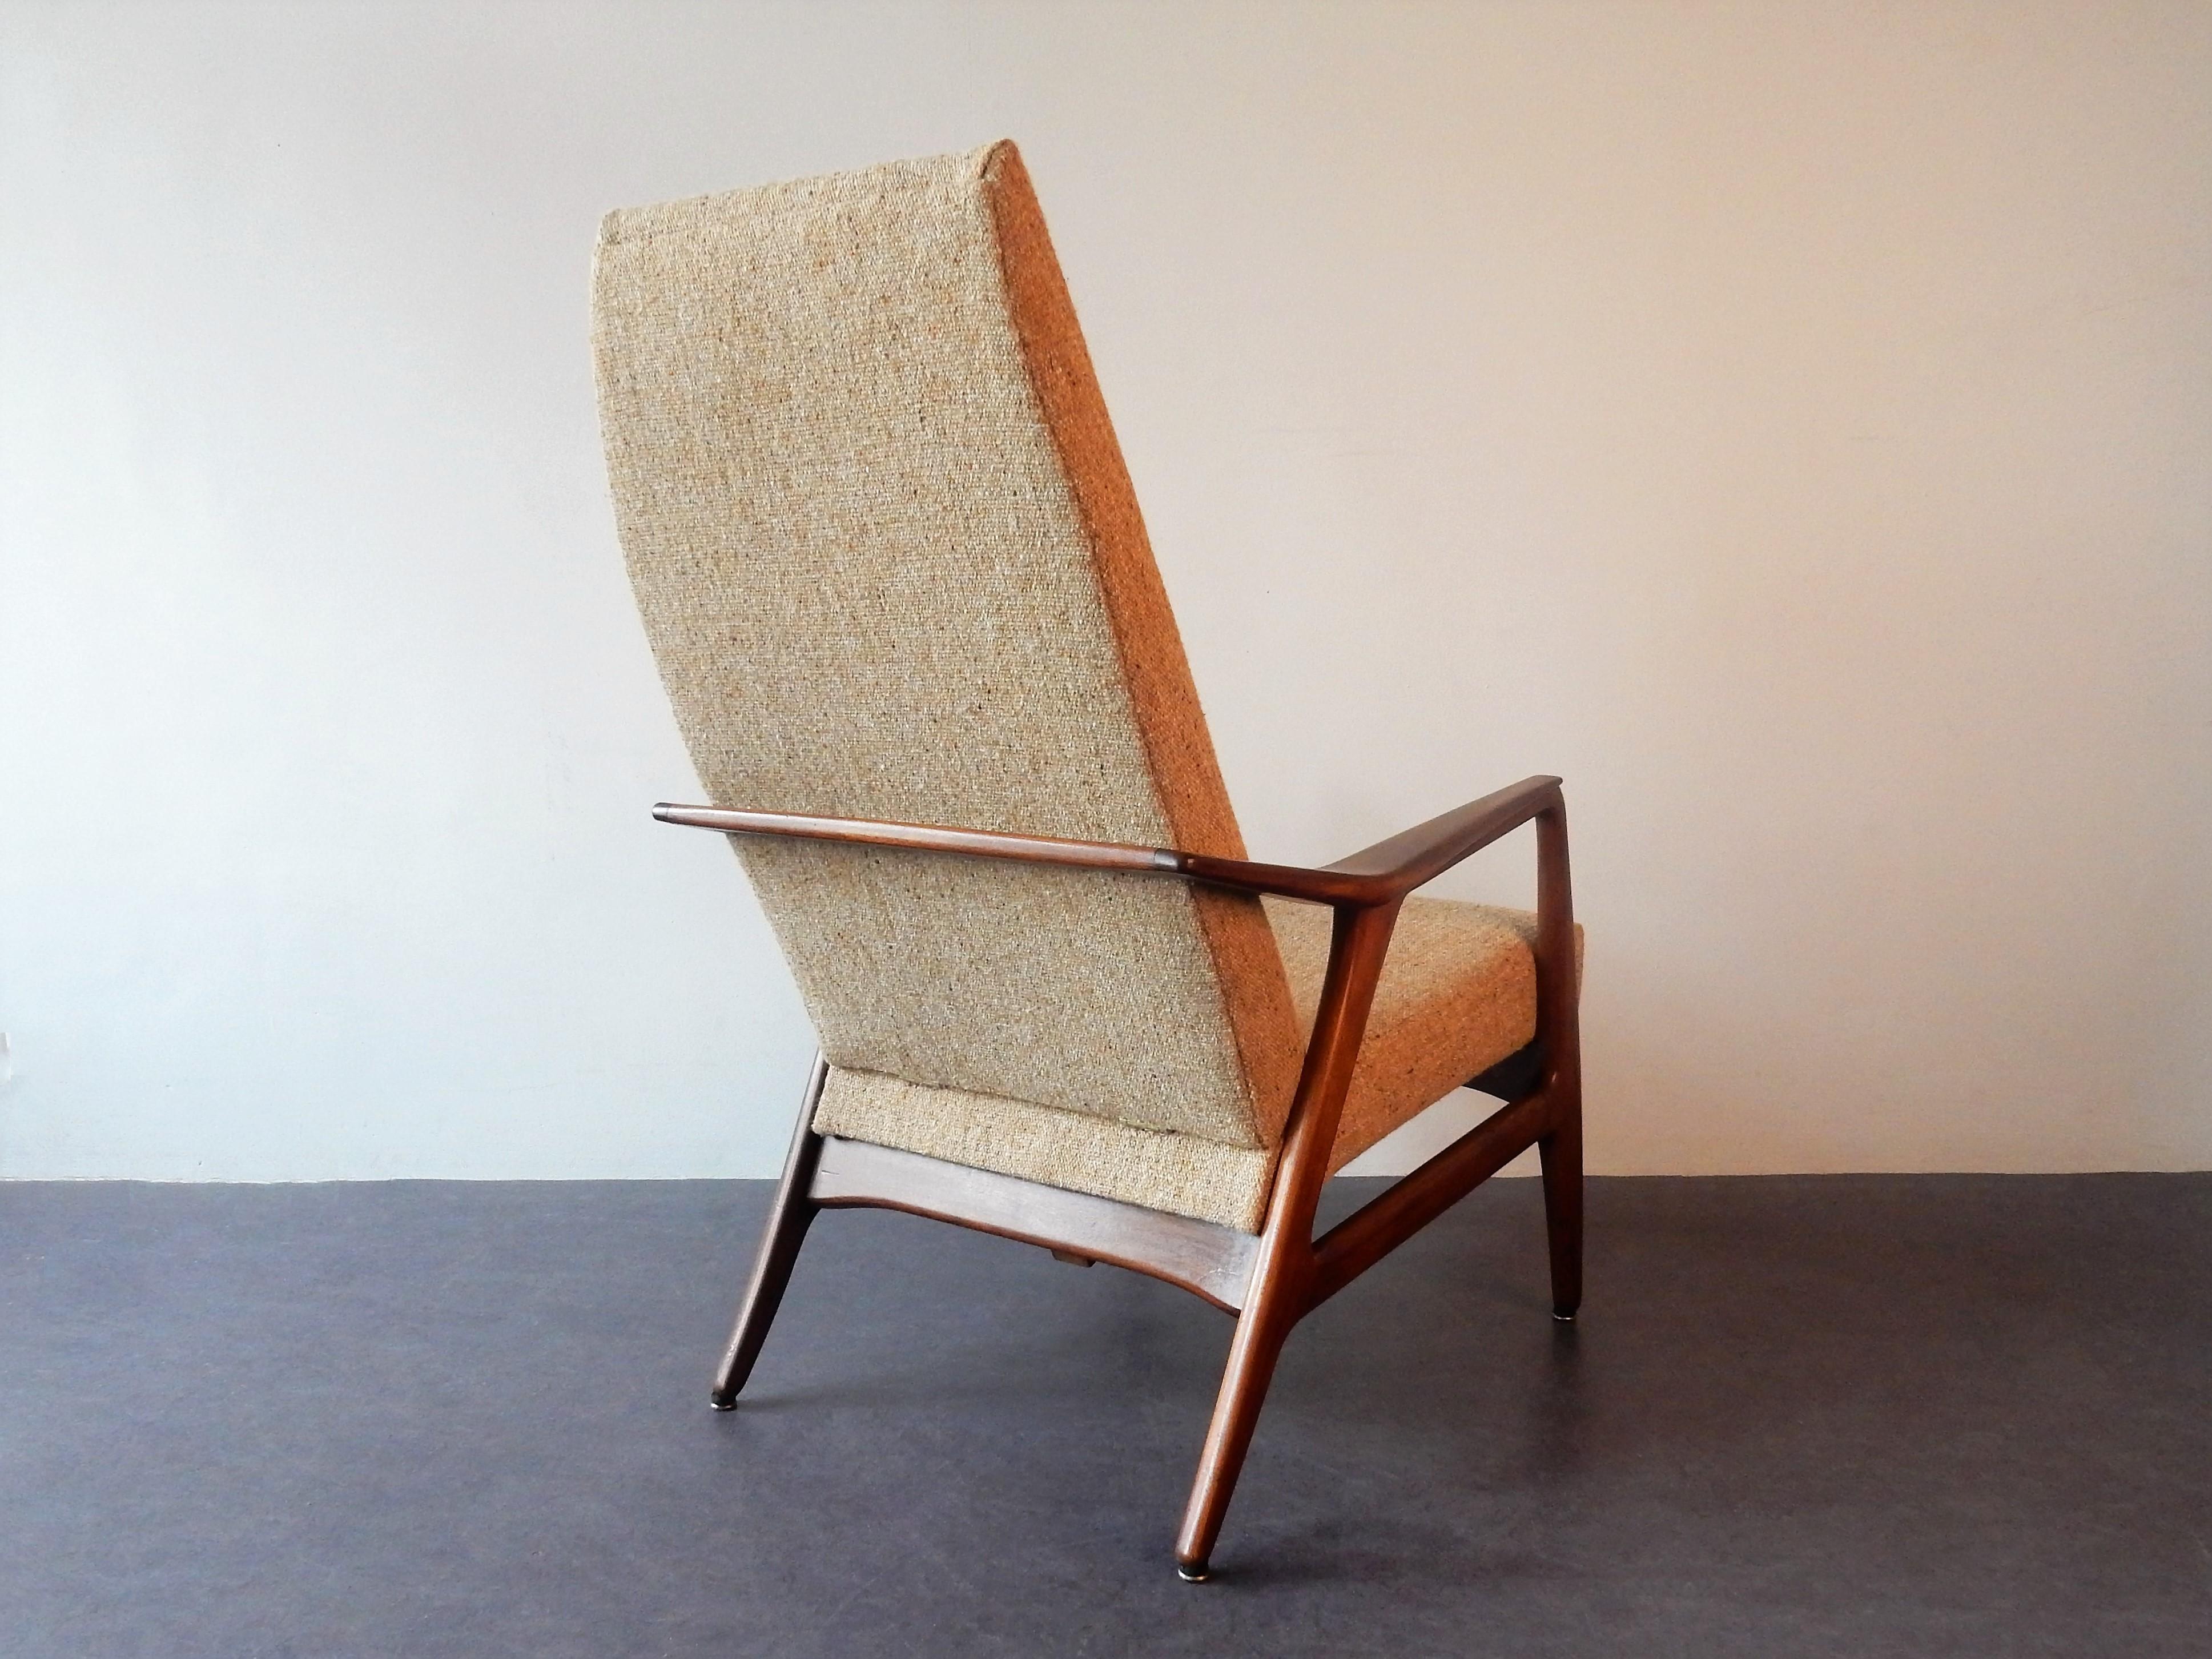 This high back lounge chair or armchair has been reupholstered in a 'Danish art Weaving' fabric/wool and new foam by a professional restorer. It is in a very good condition with minor signs of age and use in the teak frame. The combination of the